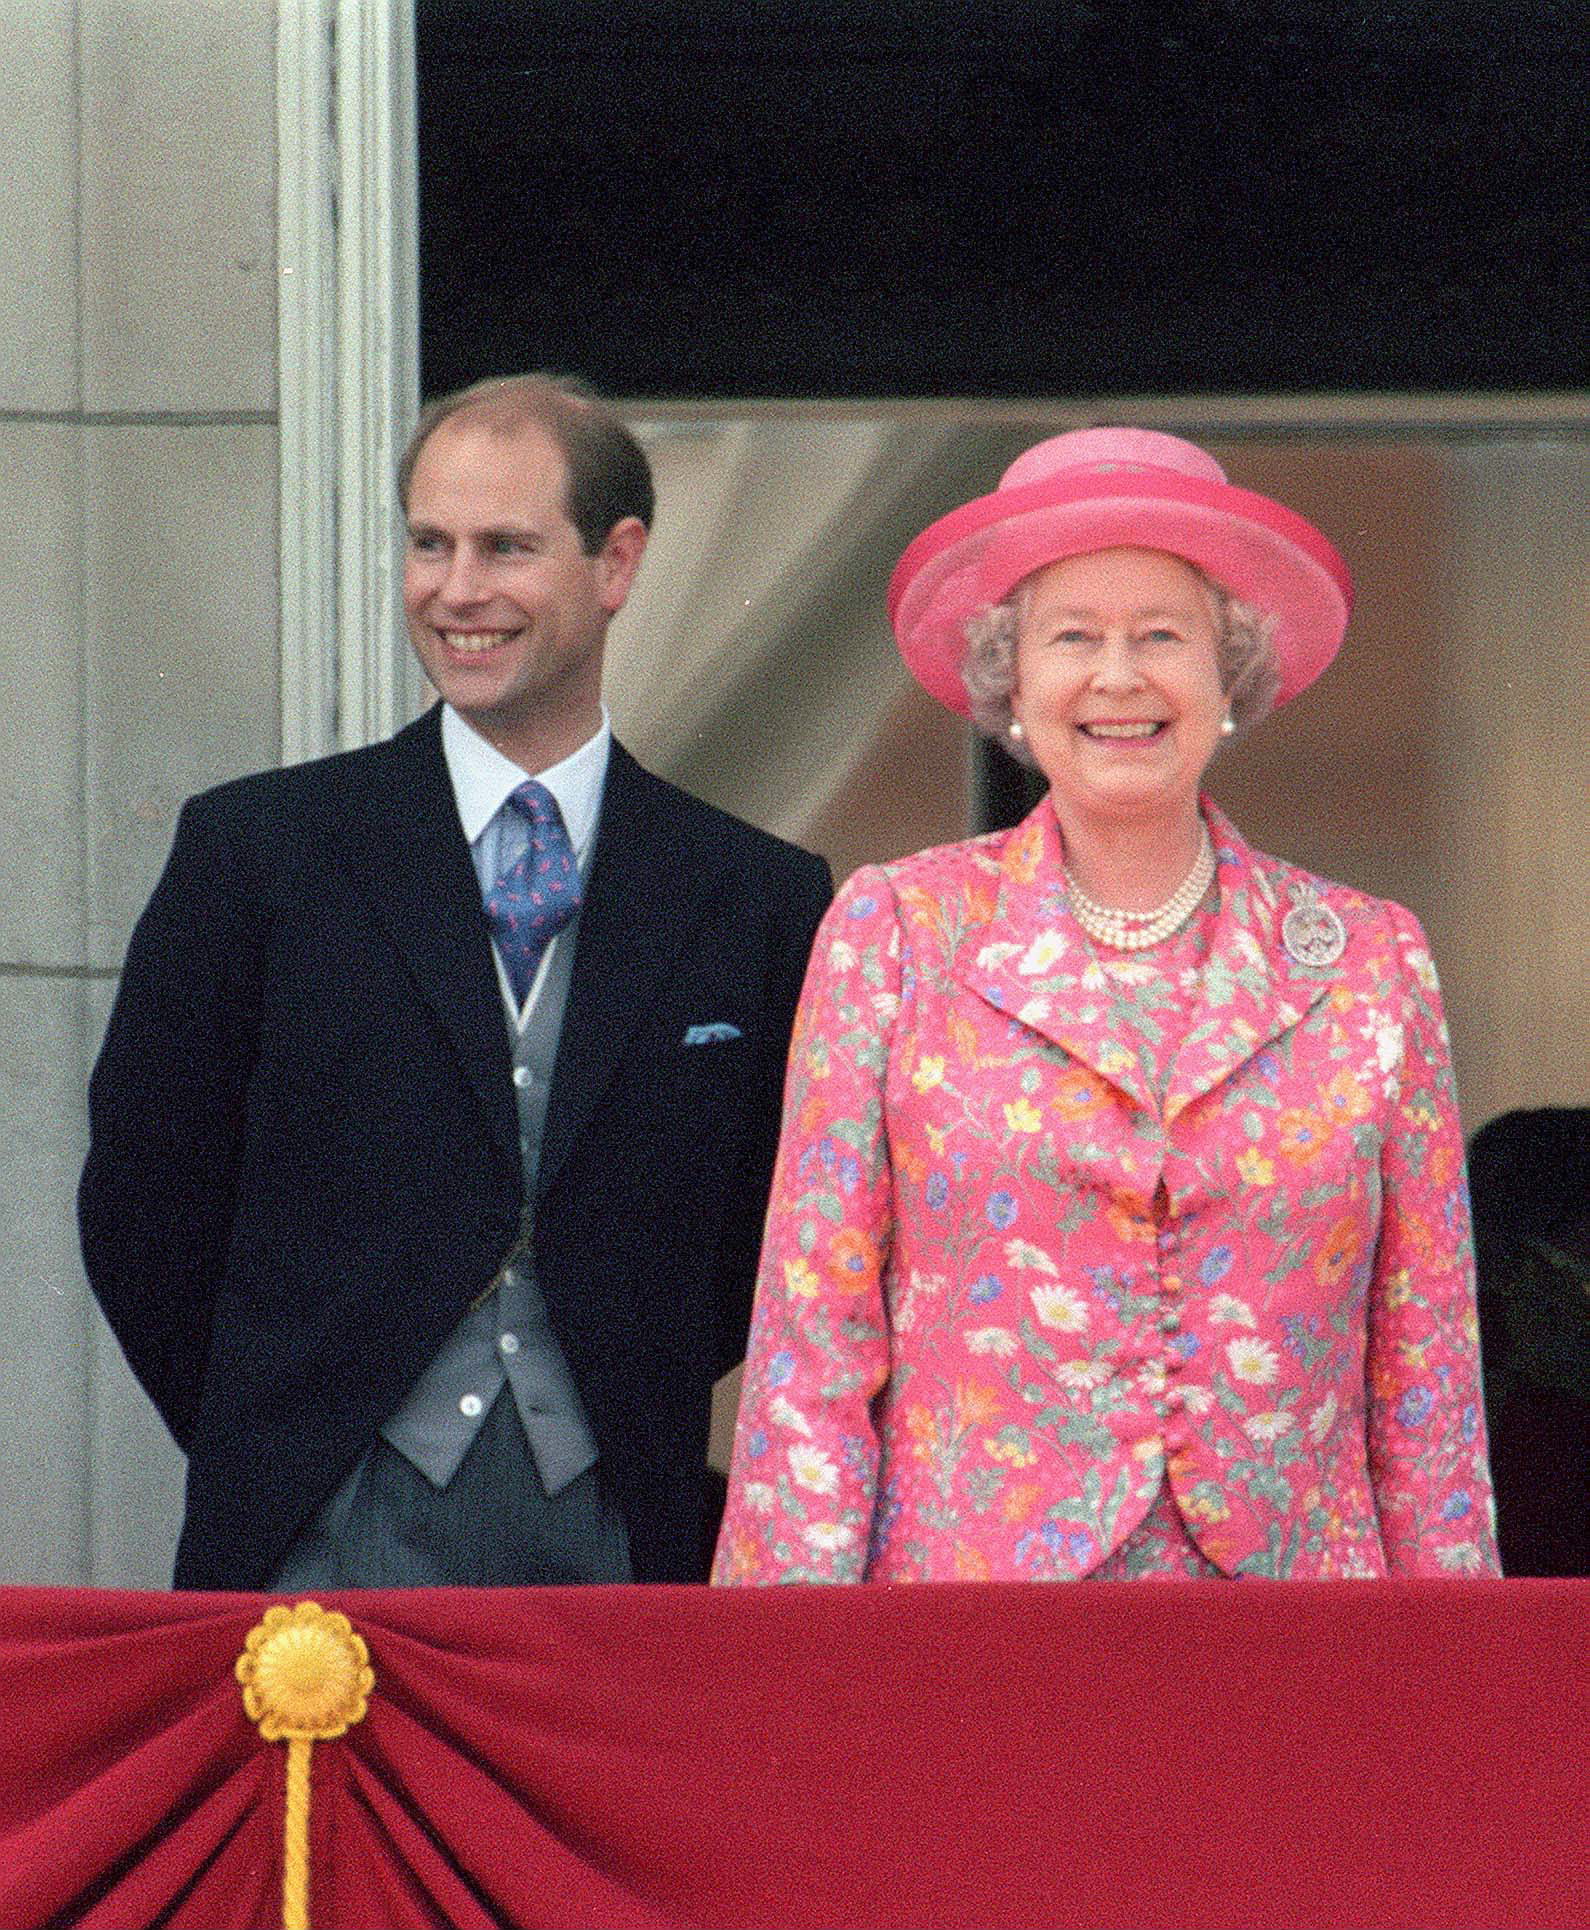 Prince Edward with his mother, Queen Elizabeth II